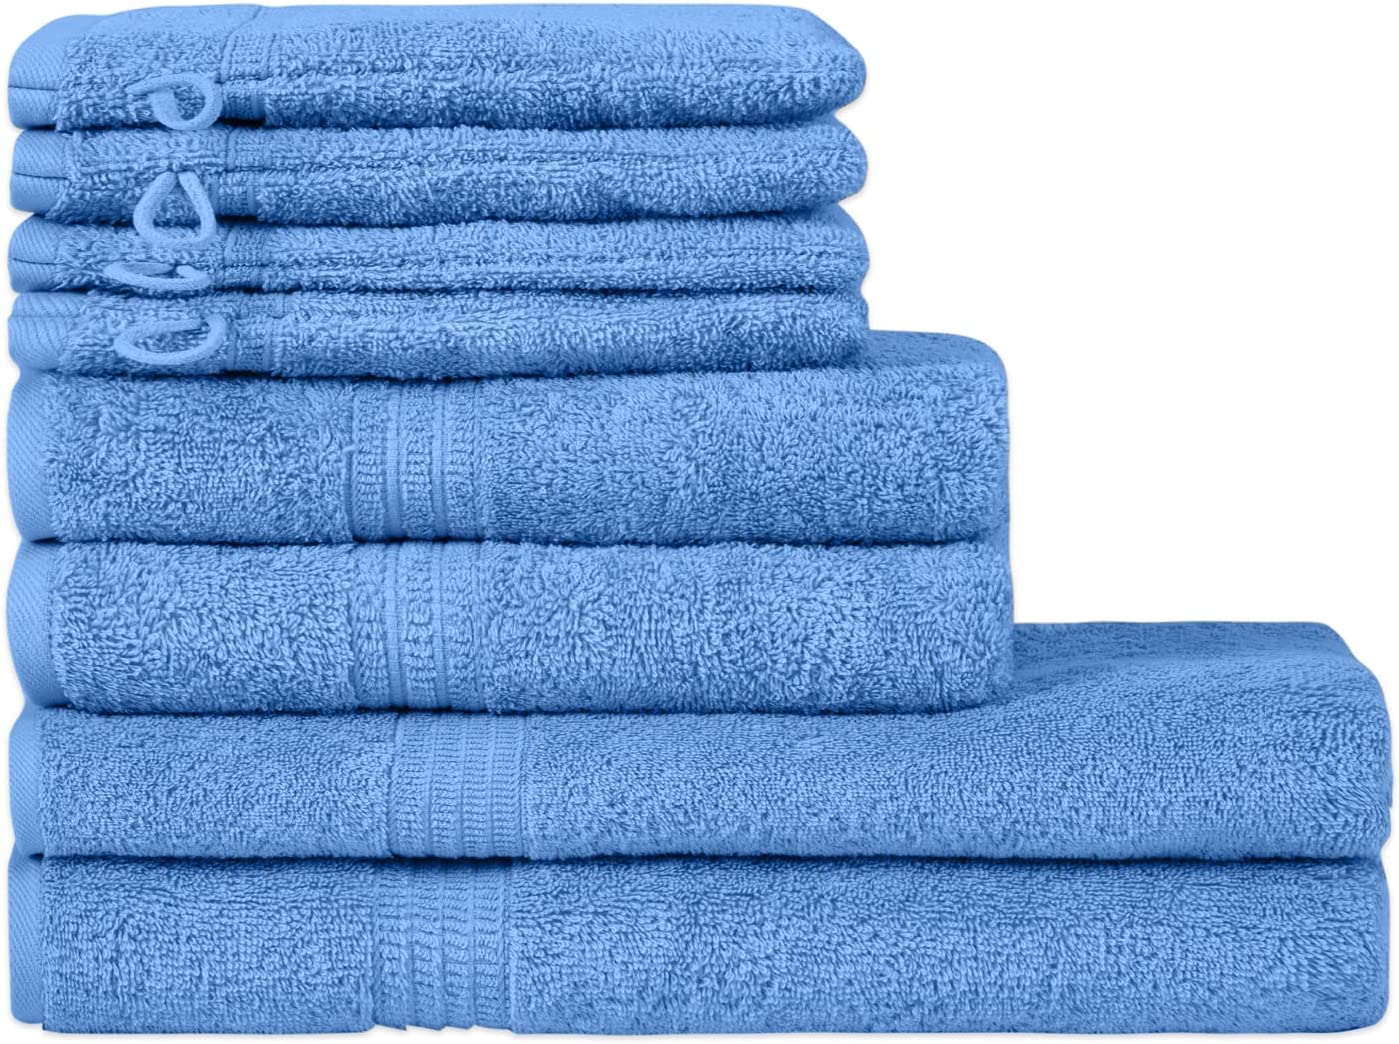 Organic Towel Sets in Sky Blue, Towel Collection